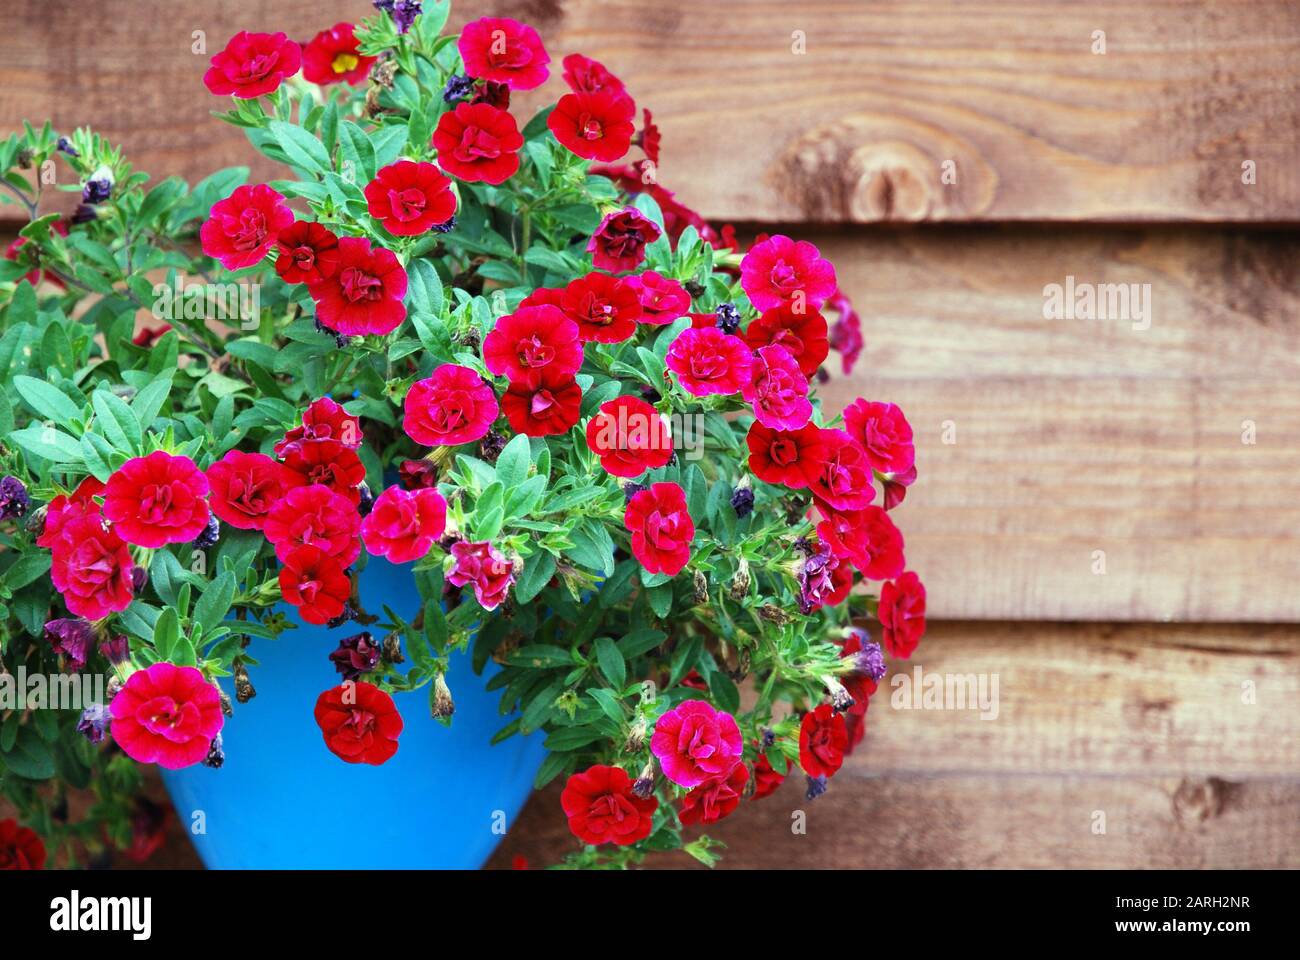 Deep red ampelous mini petunia flowers in turquoise blue pot against wooden wall background.  Superbells Calibrachoa Hybrid Stock Photo